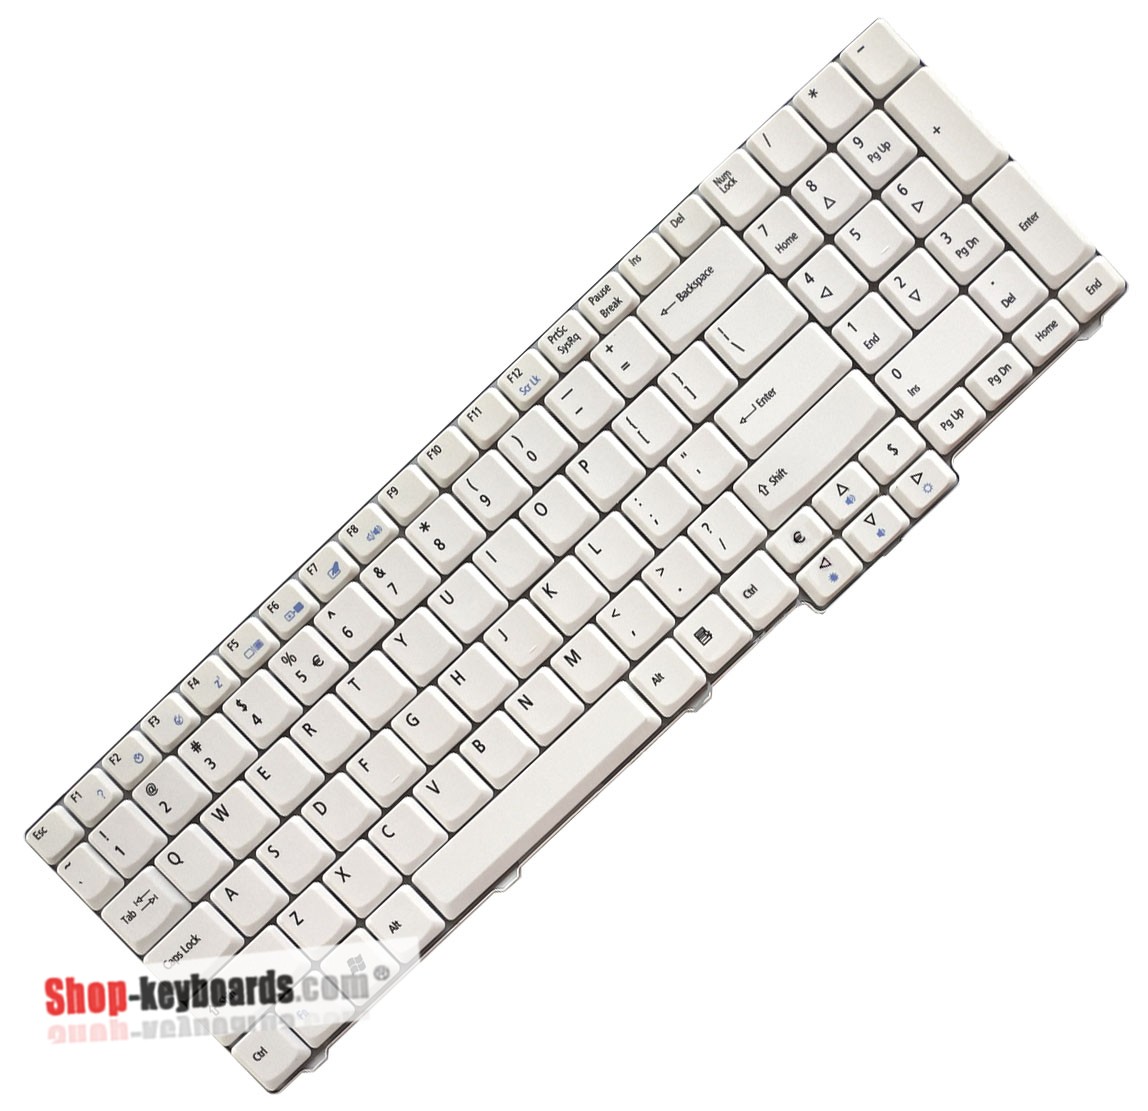 Acer MP-07A56N0-442 Keyboard replacement